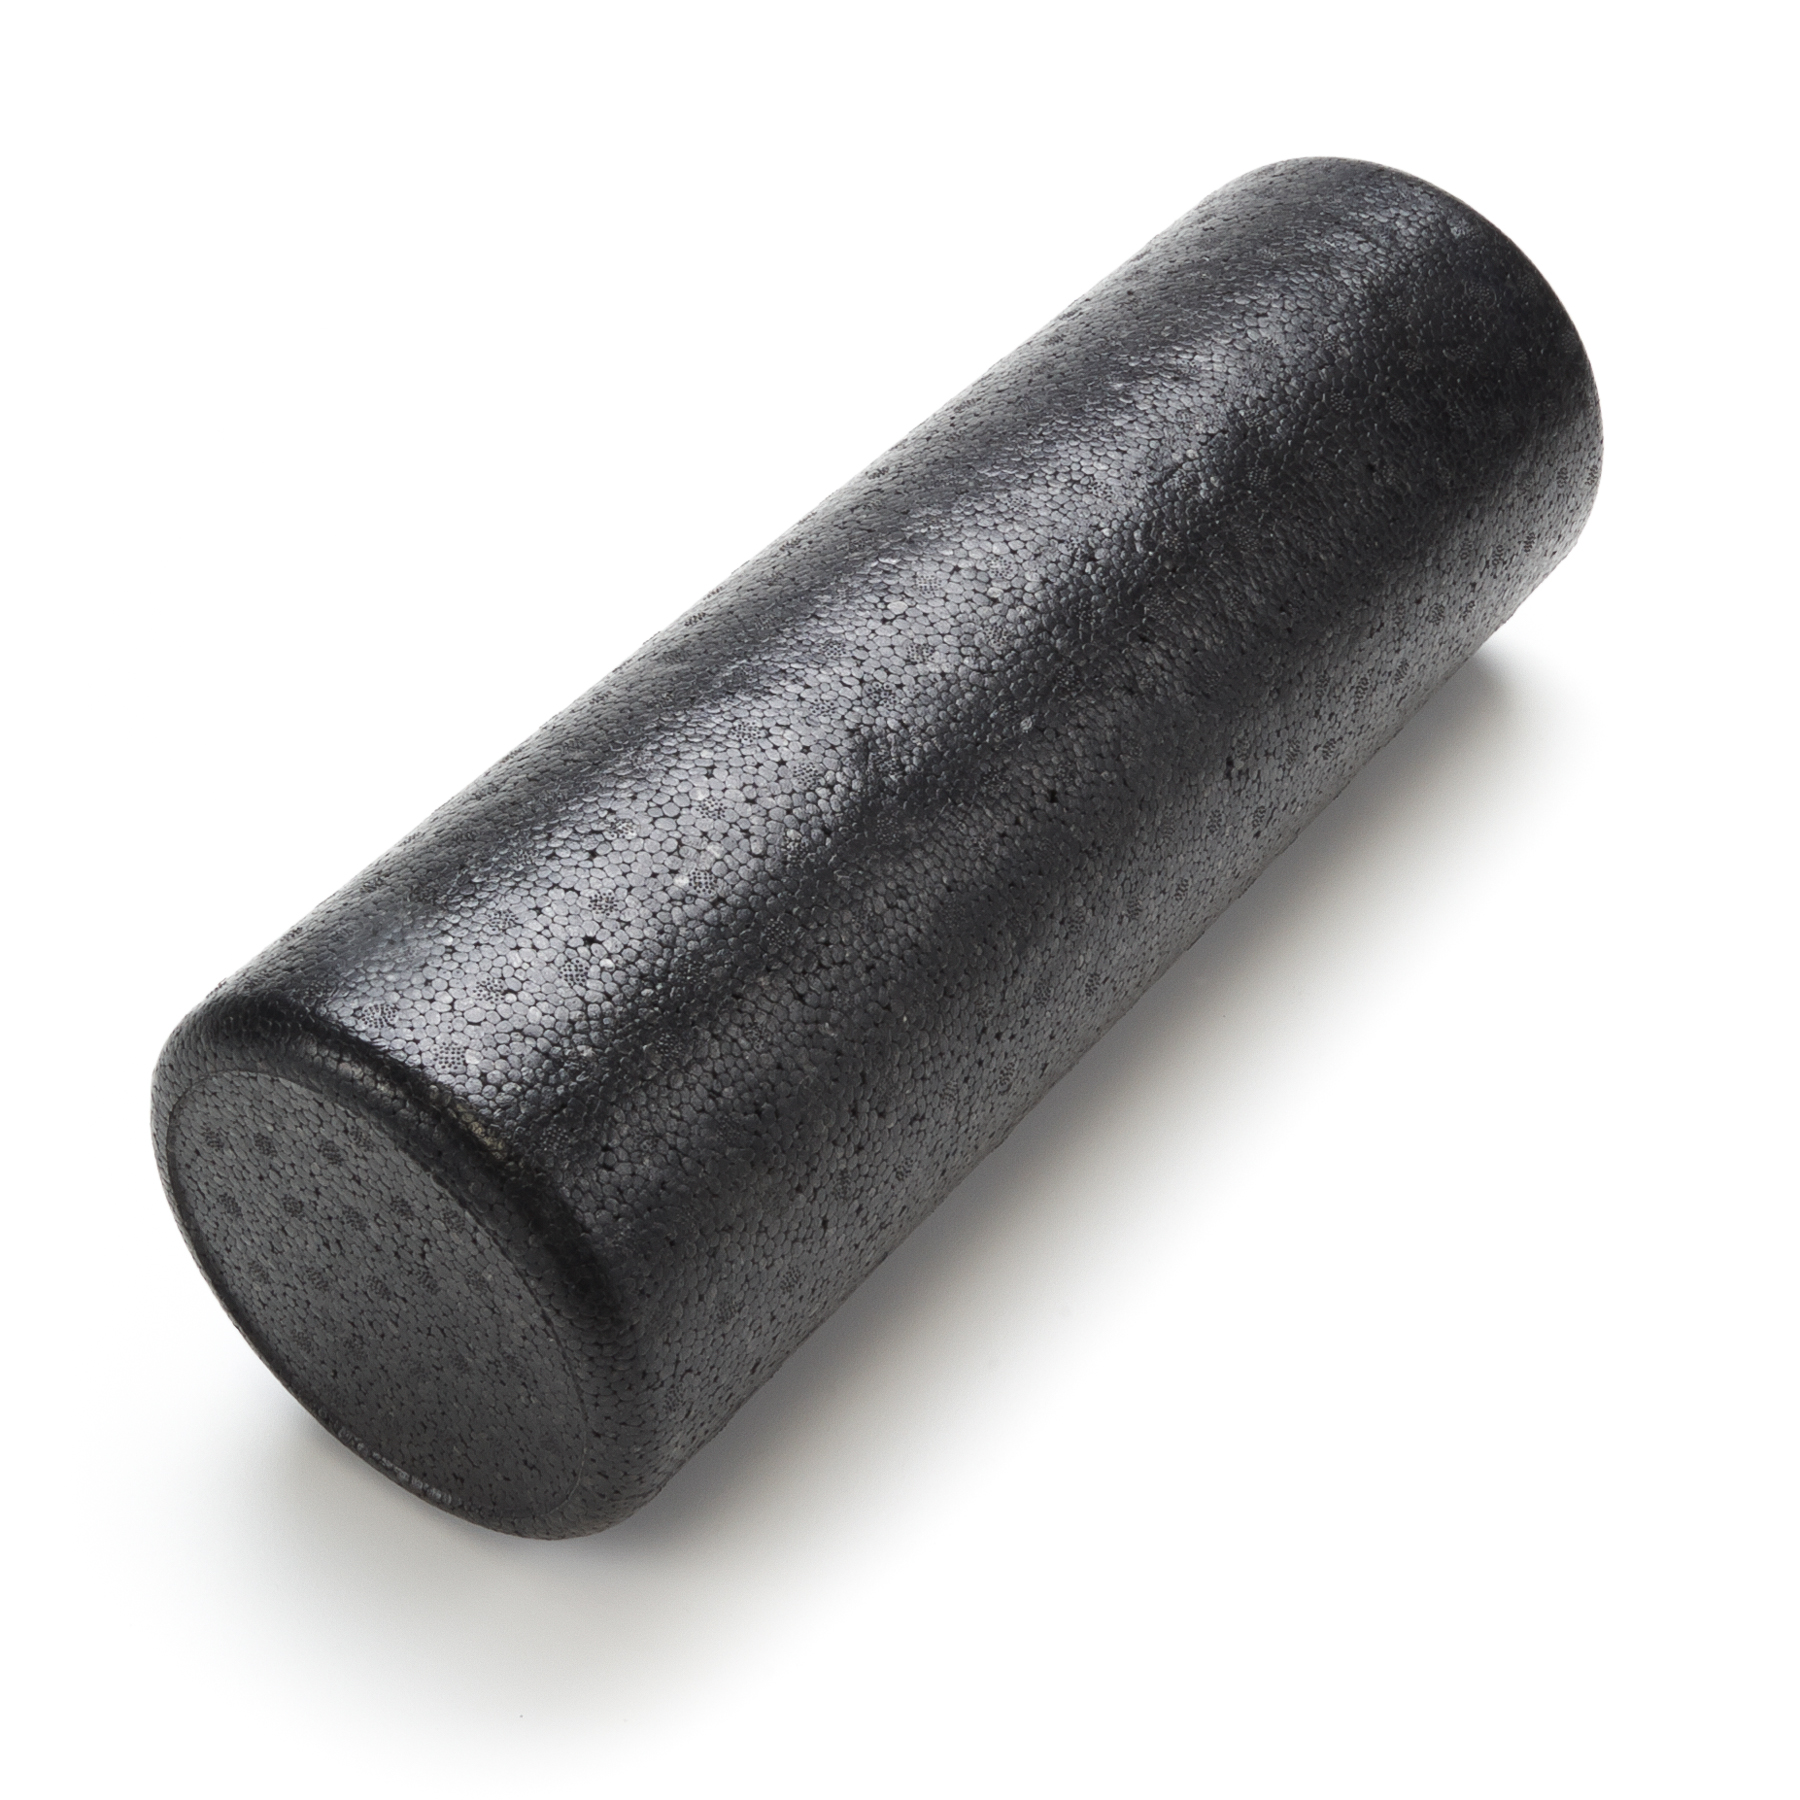 HIGH DENSITY FOAM ROLLER (Extra Firm) - Black Mountain Products